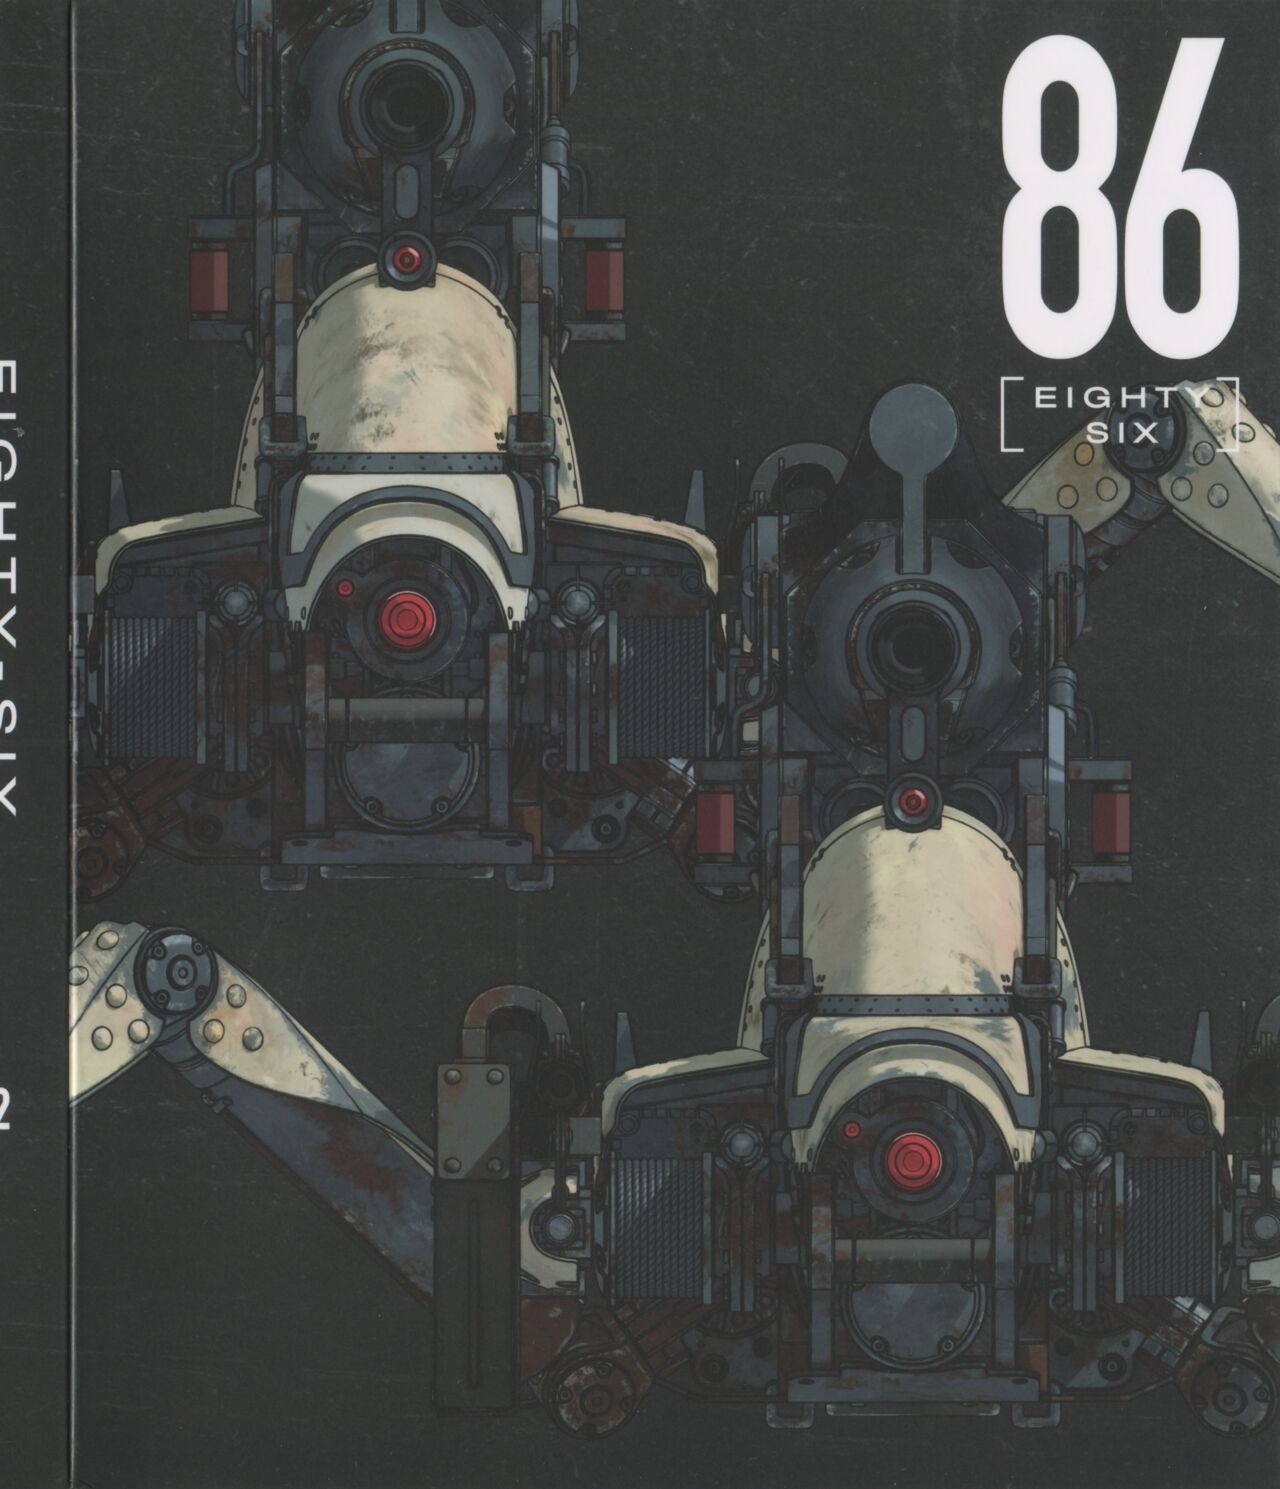 86 Eighty Six BD Scans + Booklet 46